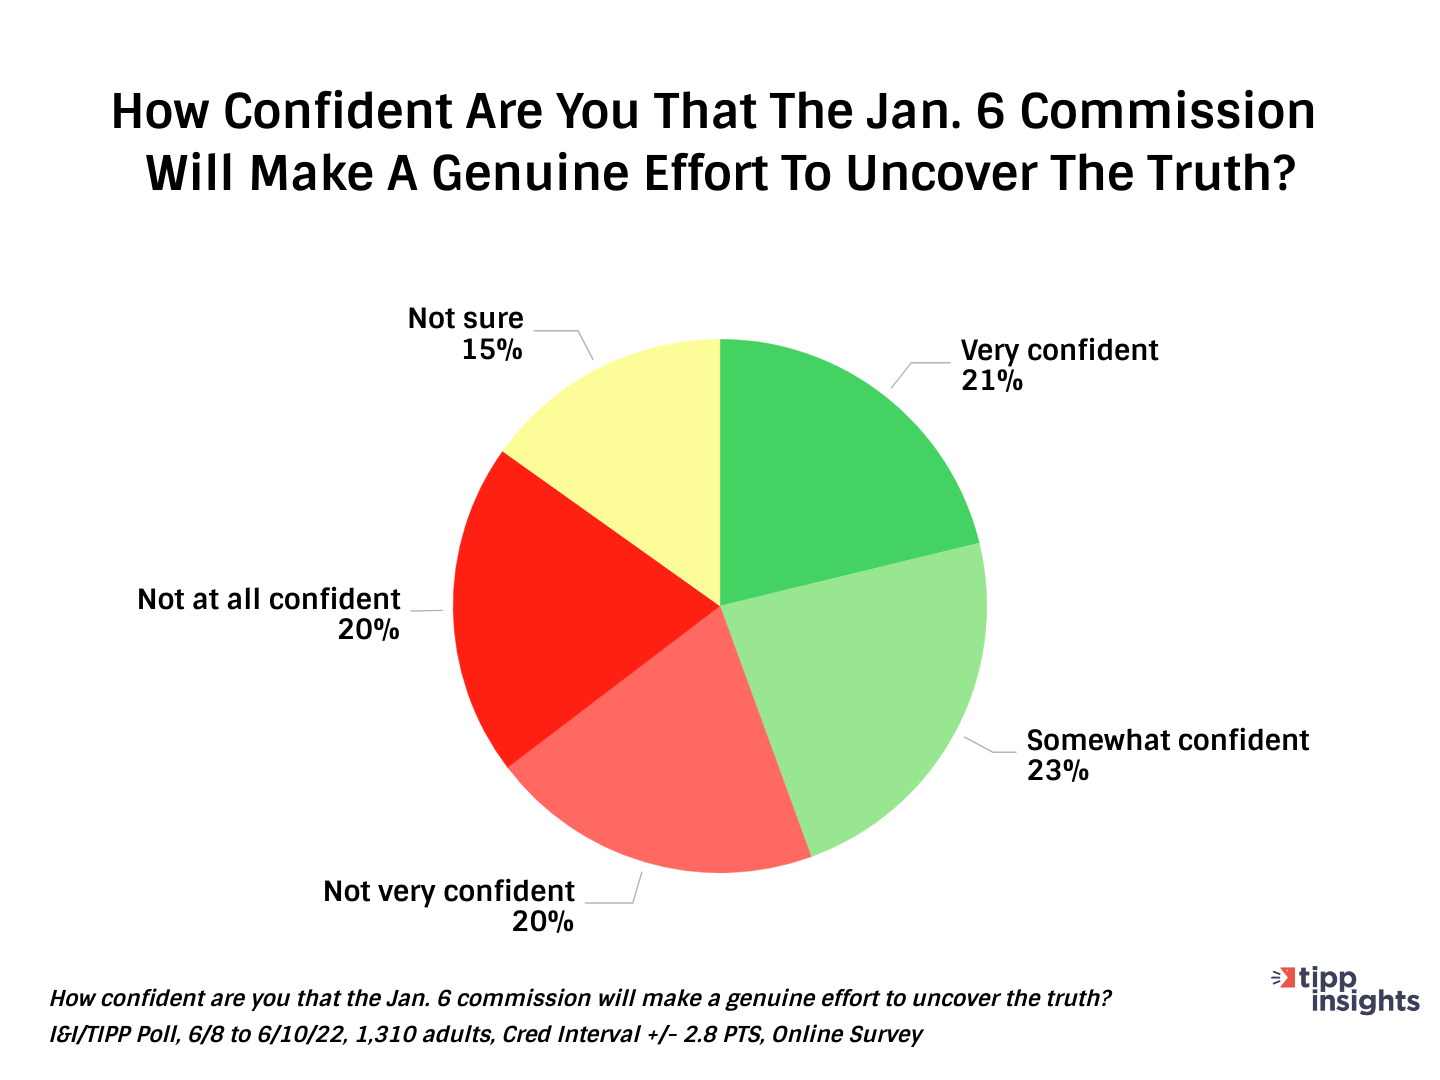 I&I/TIPP Poll Results: How confident are americans that the January 6th Commision will make a genuine effort